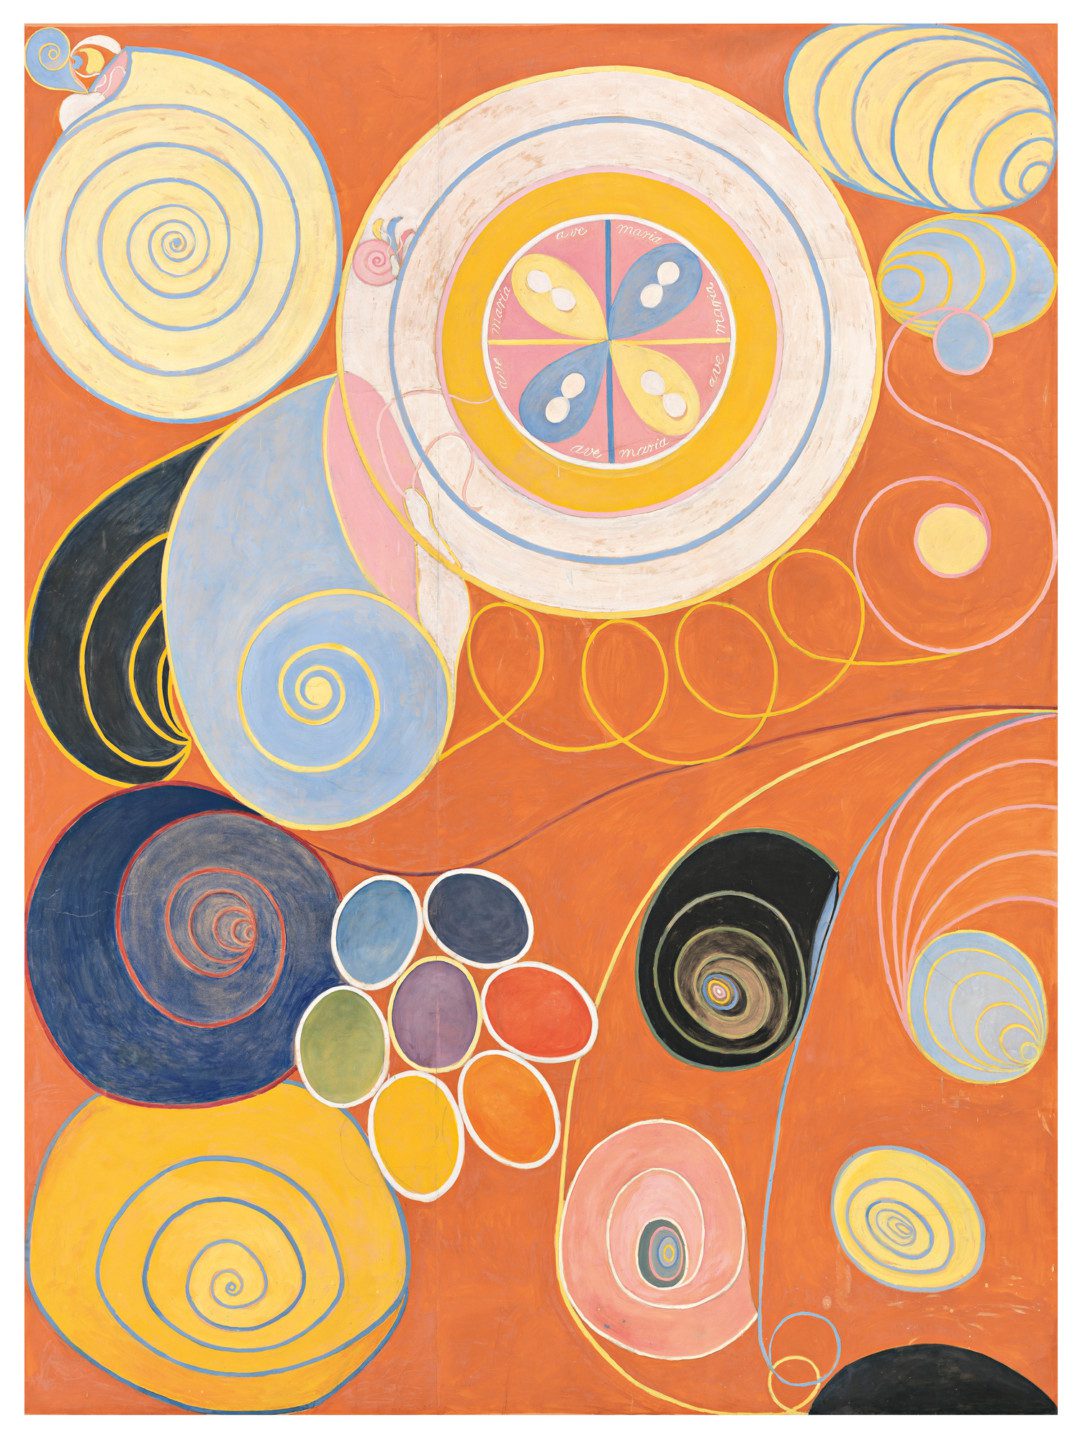 Circles and roundels in colors such as green, purple, blue red and yellow against an orange background